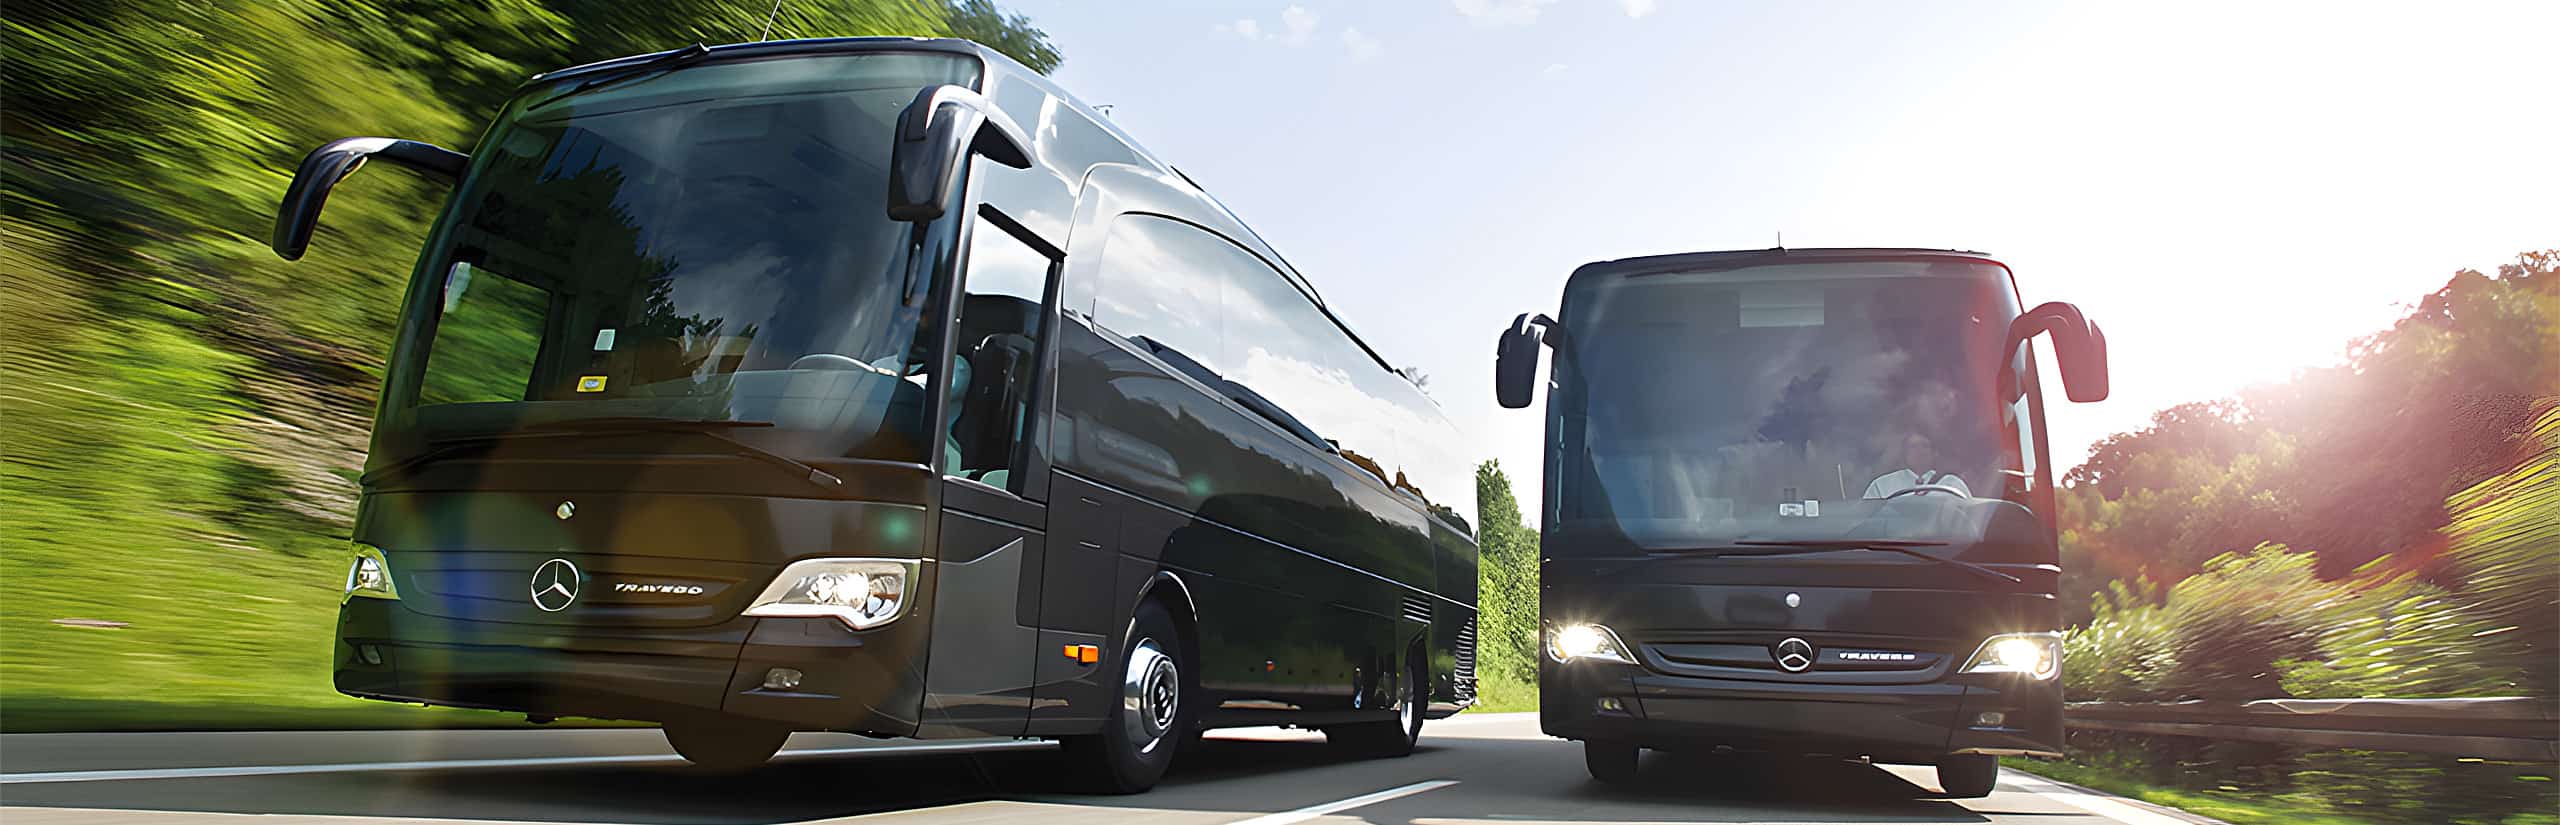 VIP coach bus hire in Munich for 34 people